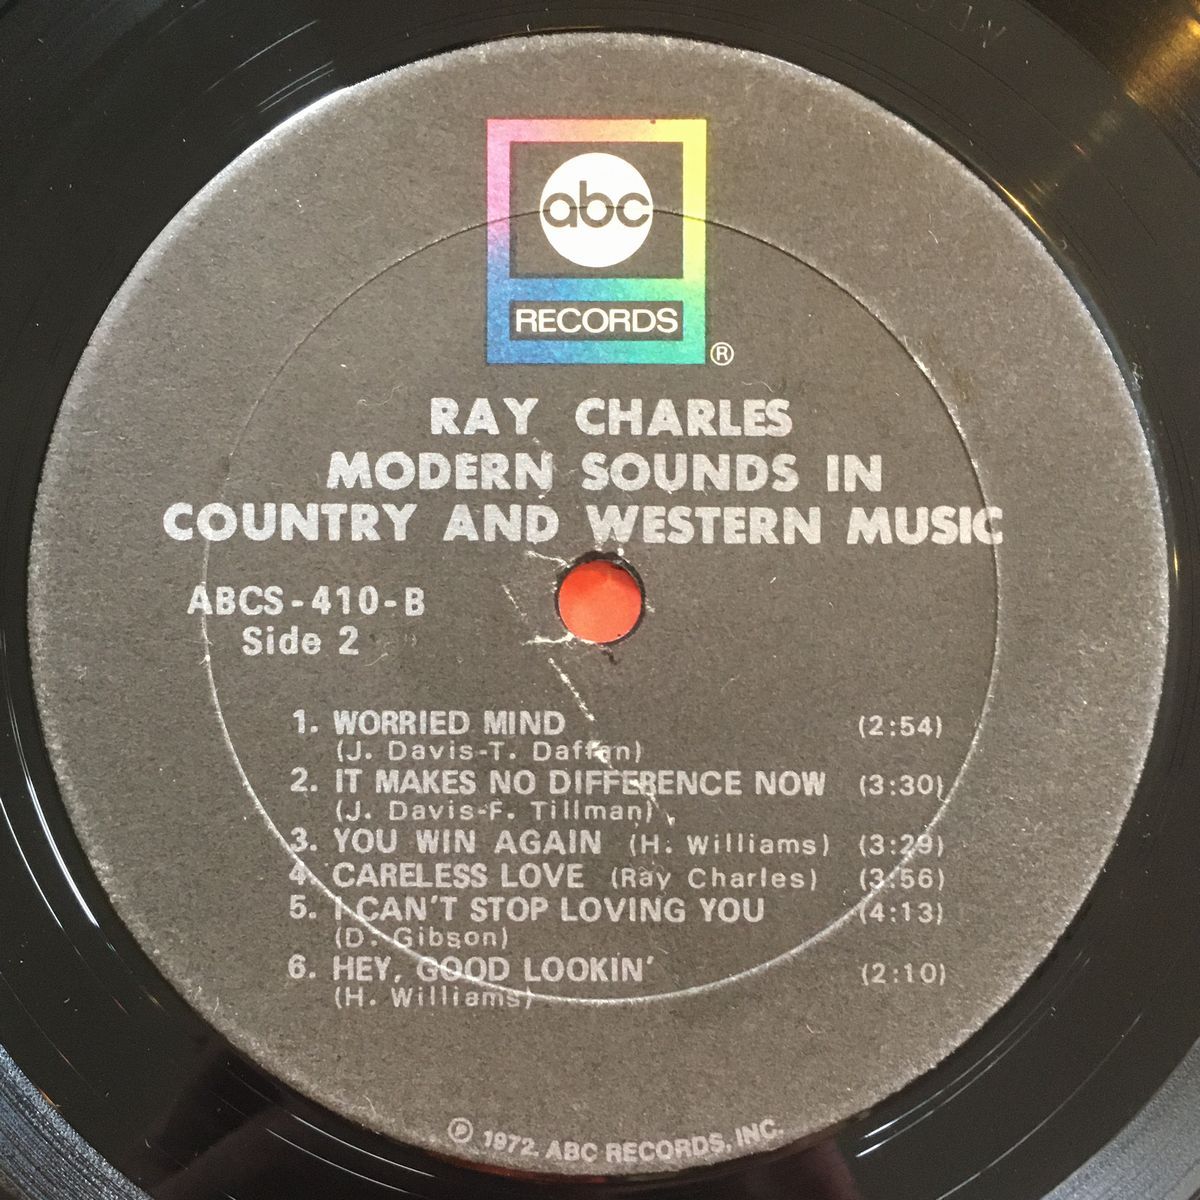 RAY CHARLES - Modern Sounds In Country And Western Music (abc ABCS 